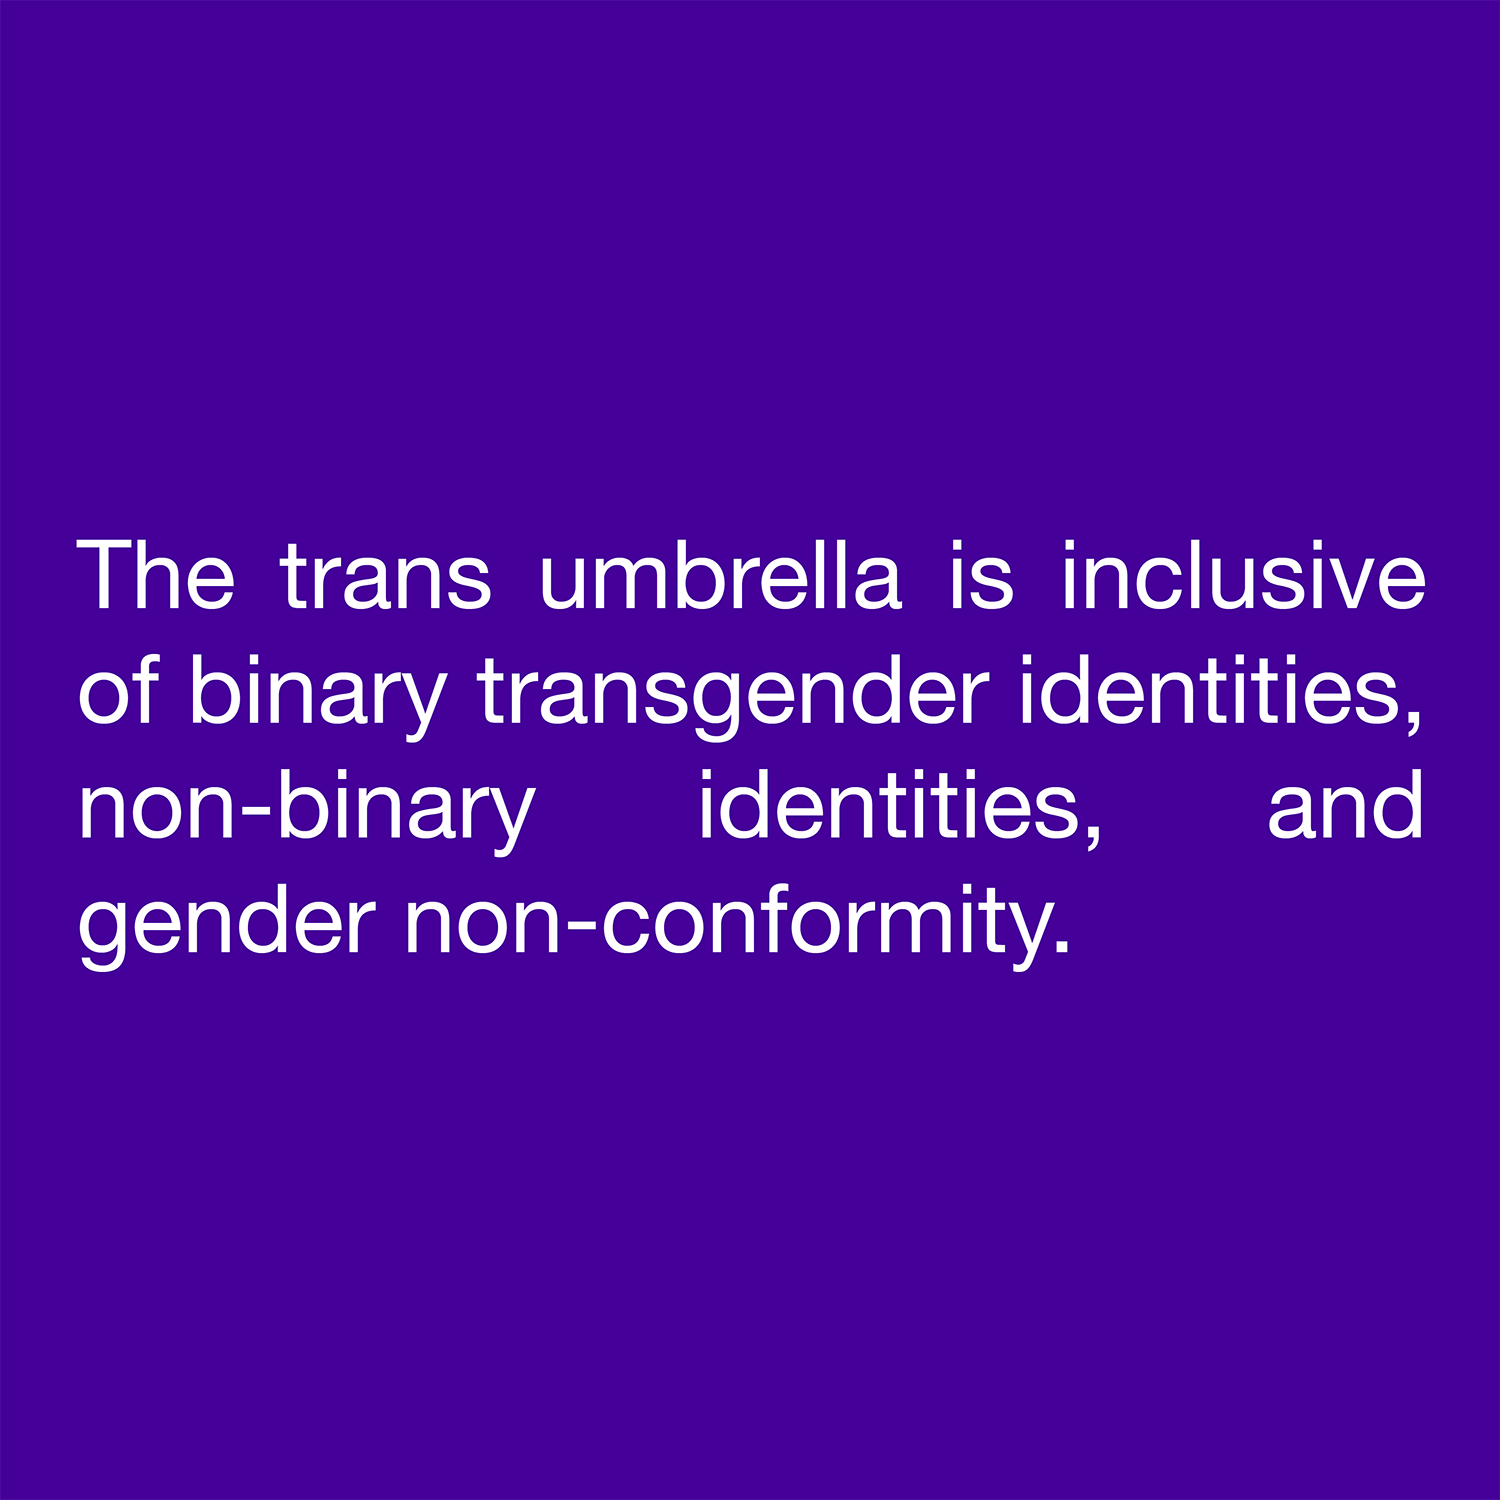  The trans umbrella is inclusive of binary transgender identities, non-binary identities, and gender non-conformity. 